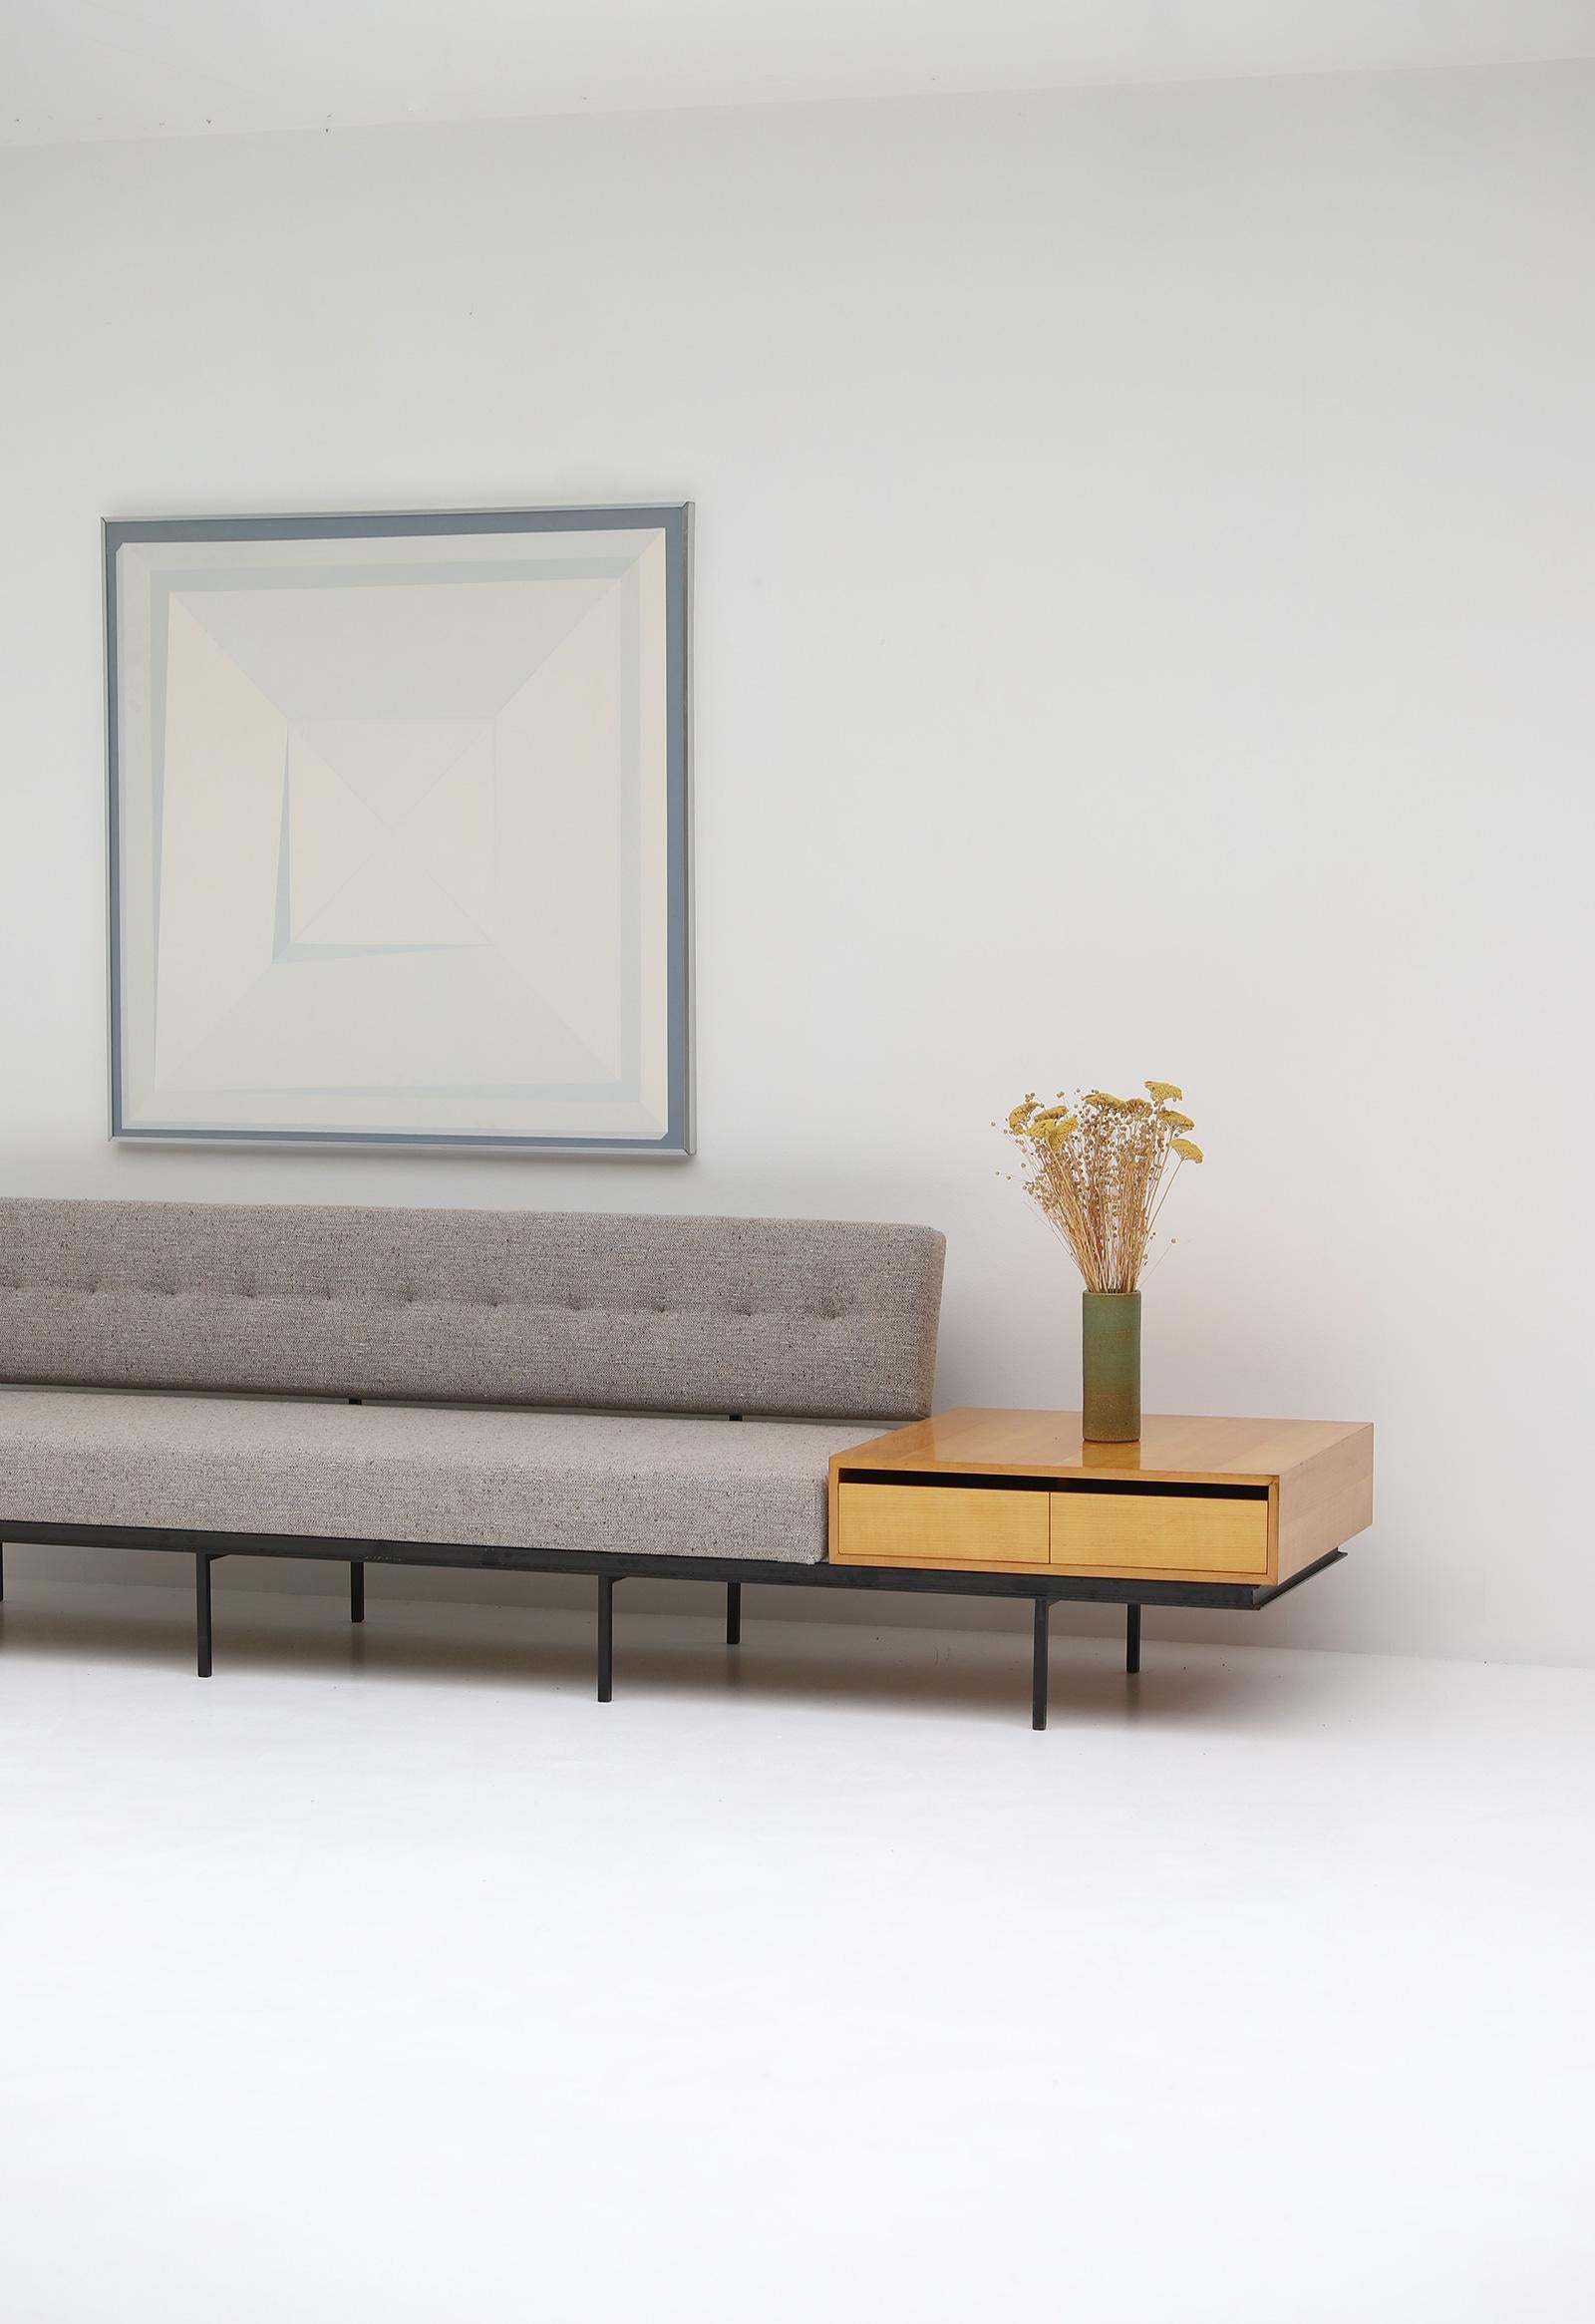 European Mid-Century Modern Sofa & End Cabinet in a Grey Fabric by Florence Knoll, 1960s For Sale